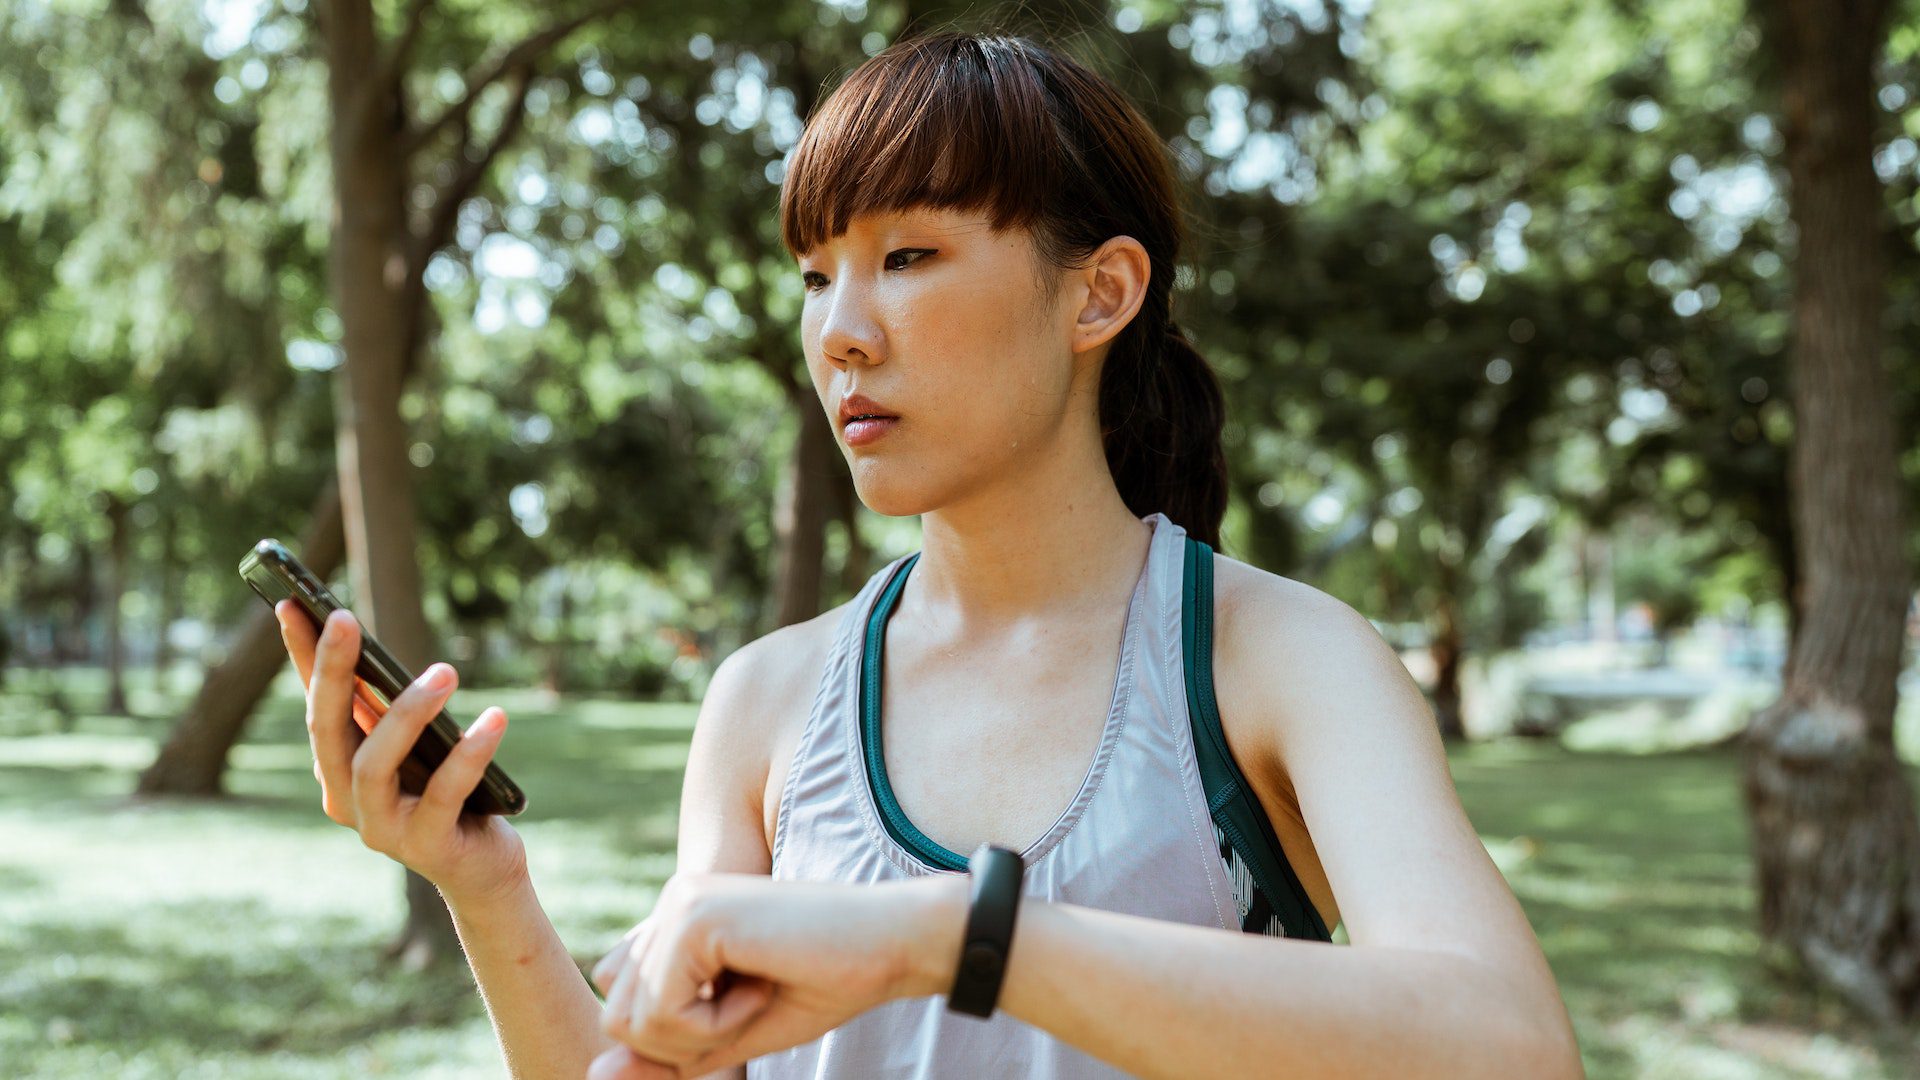 Fitness and Privacy Unite- Use Free Fitness Apps Fearlessly